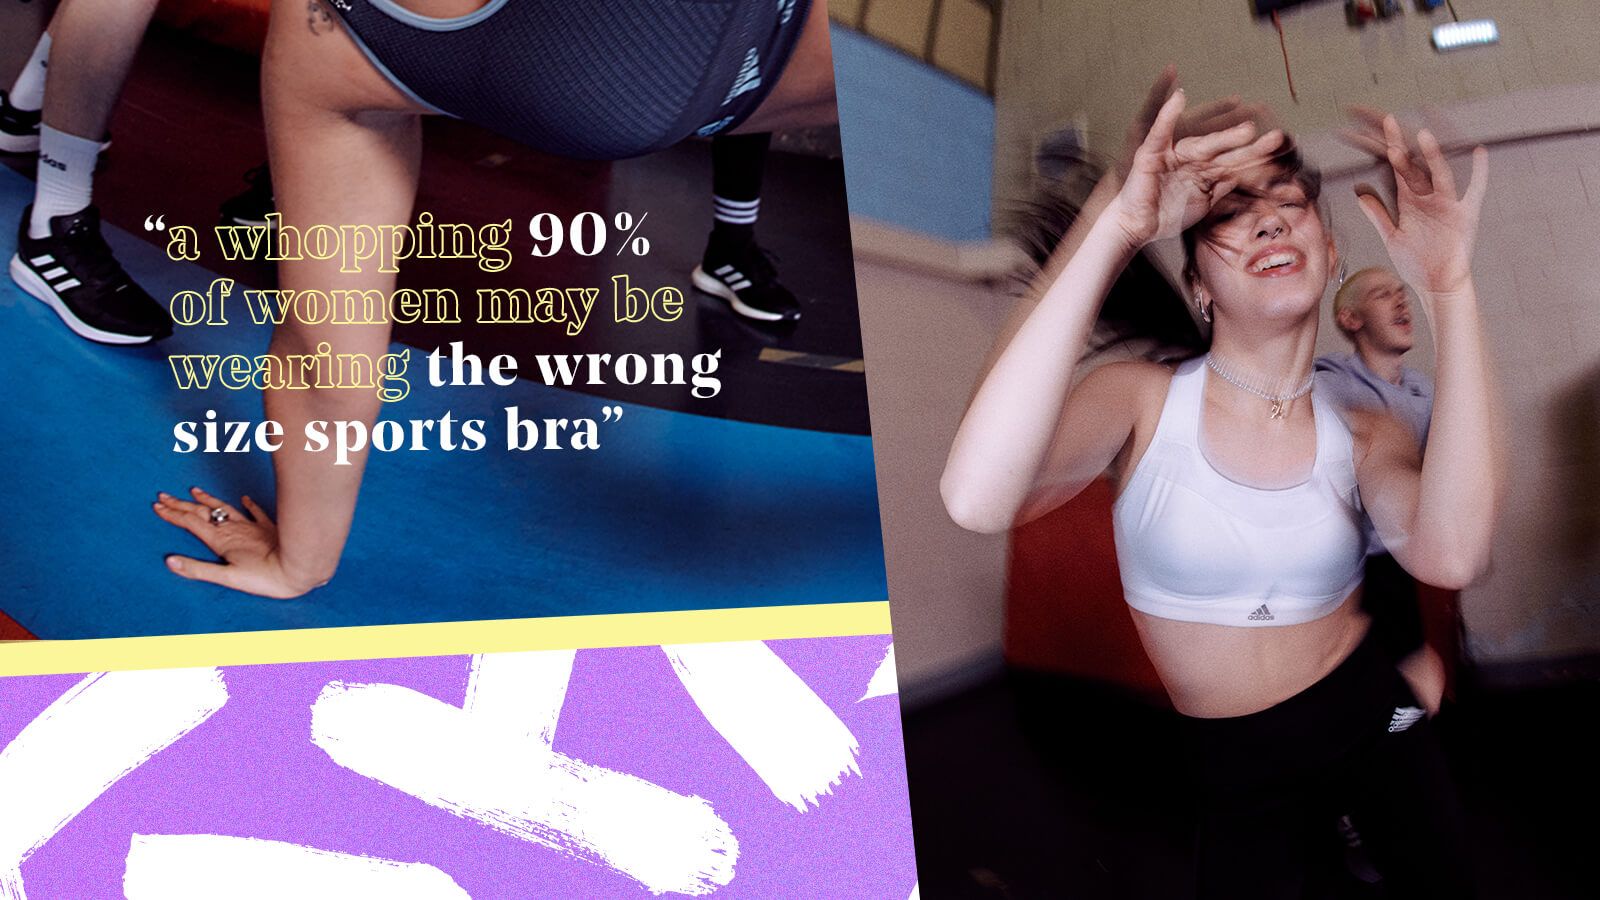 Here's why sports bras are a blocker to equality in sport